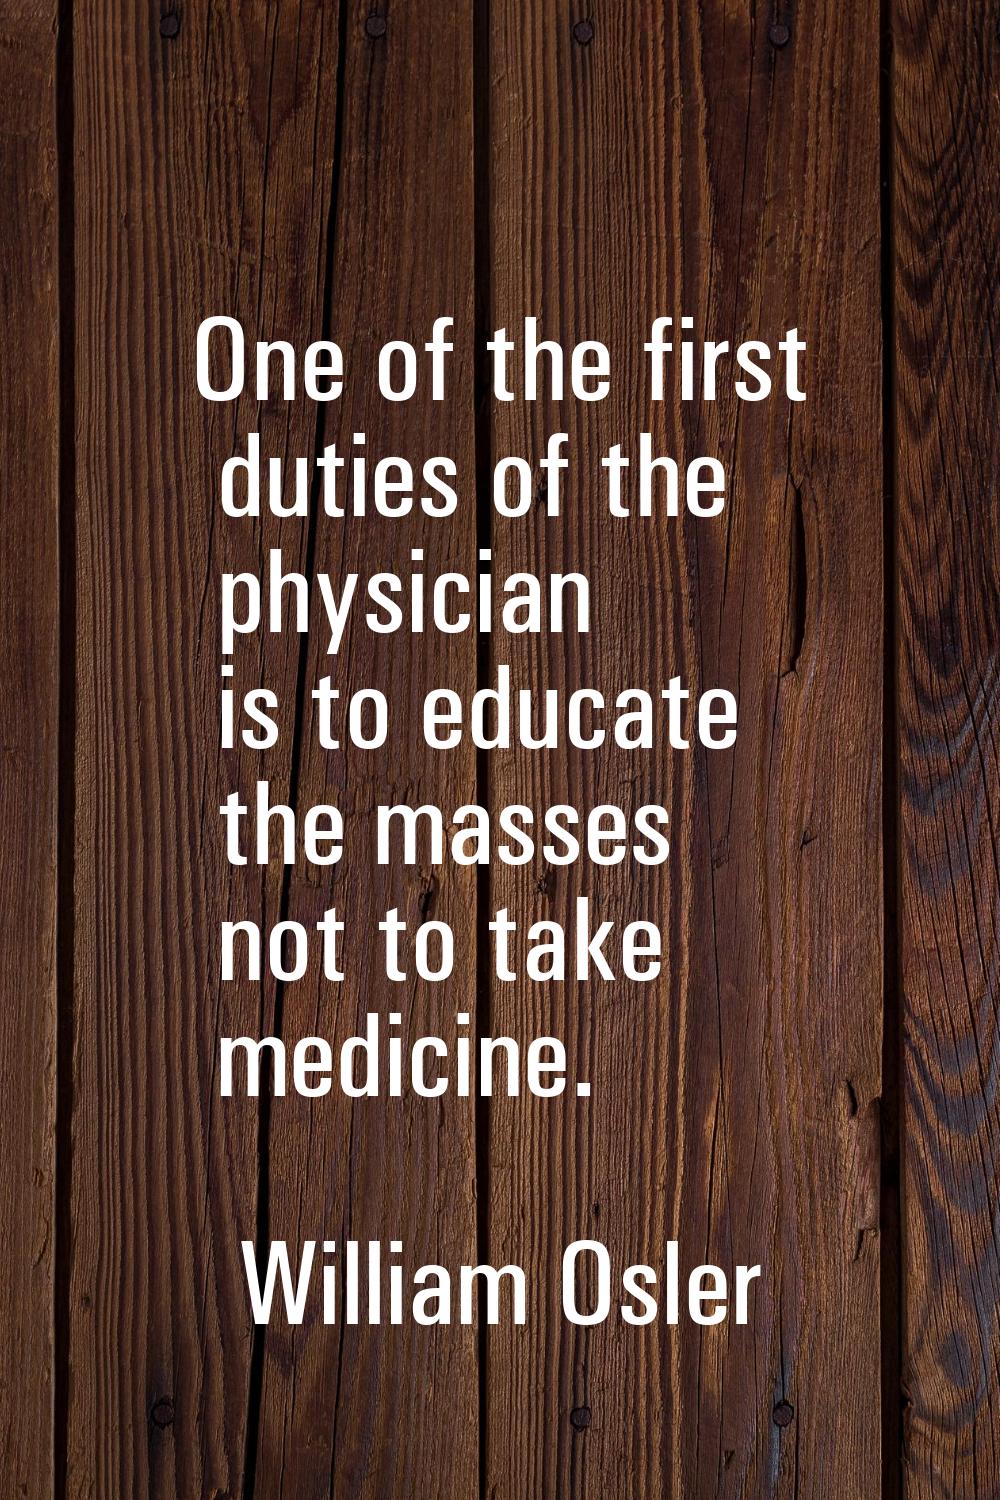 One of the first duties of the physician is to educate the masses not to take medicine.